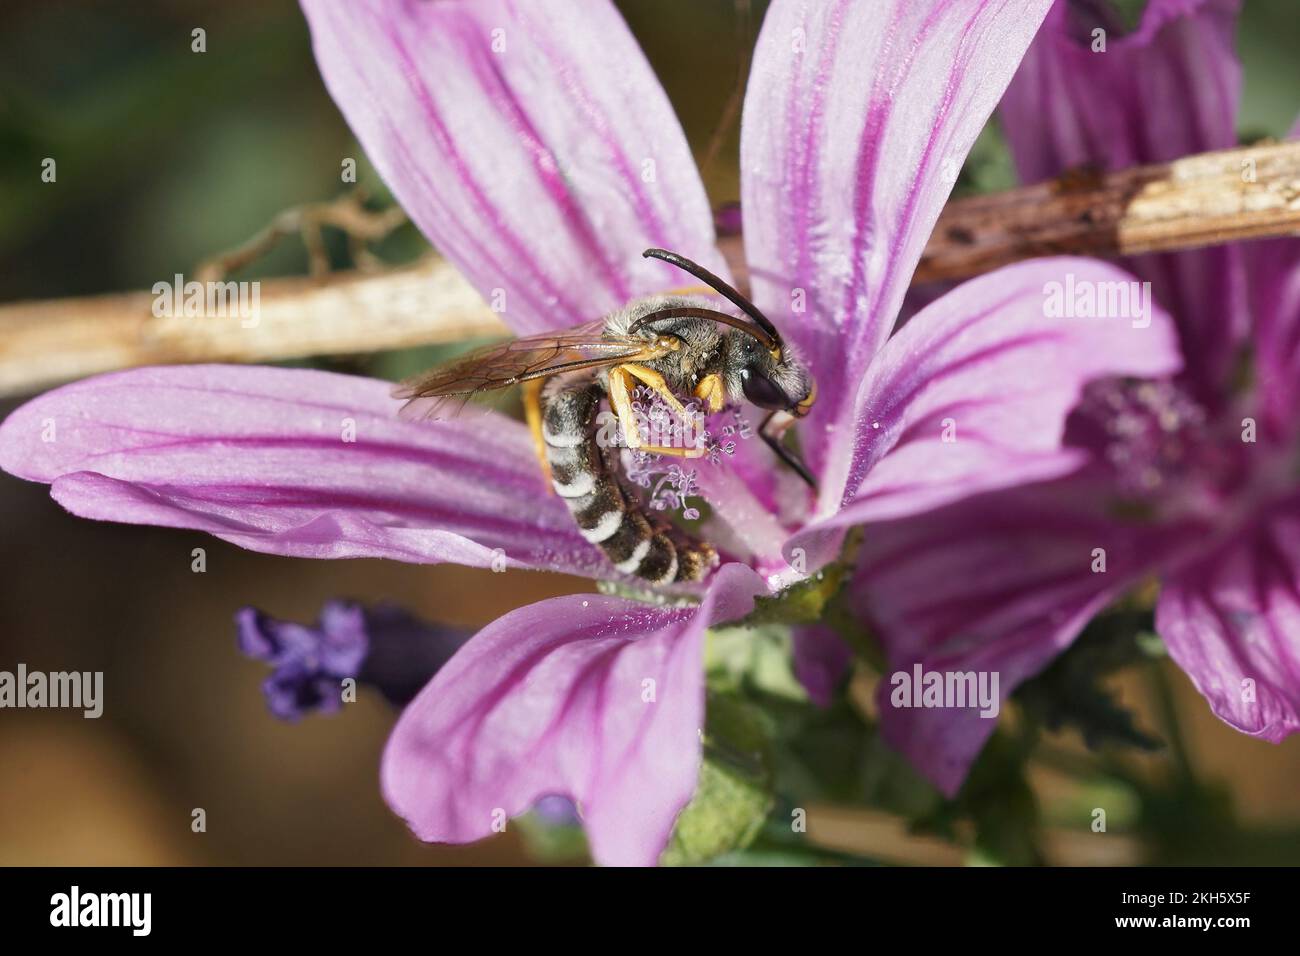 Colorful closeup shot of a male great banded furrow bee, Halictus scabiosae in a purple Mallow flower Stock Photo